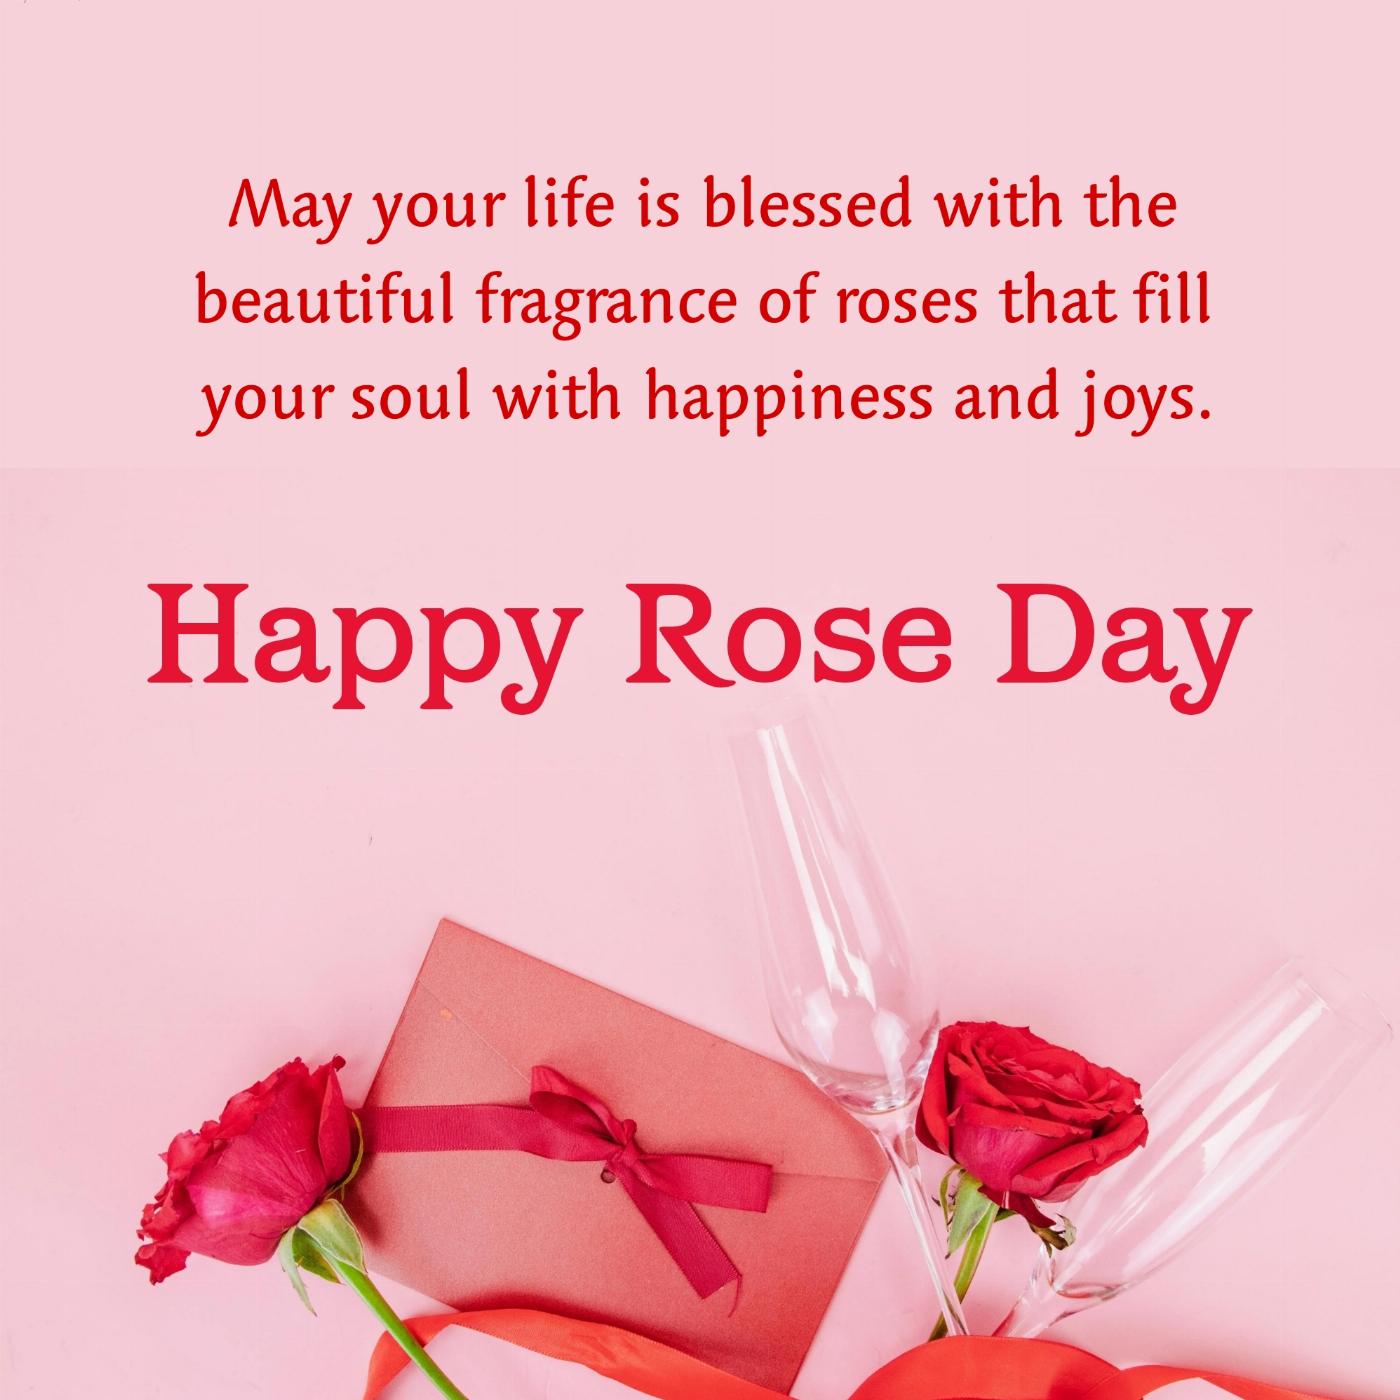 May your life is blessed with the beautiful fragrance of roses